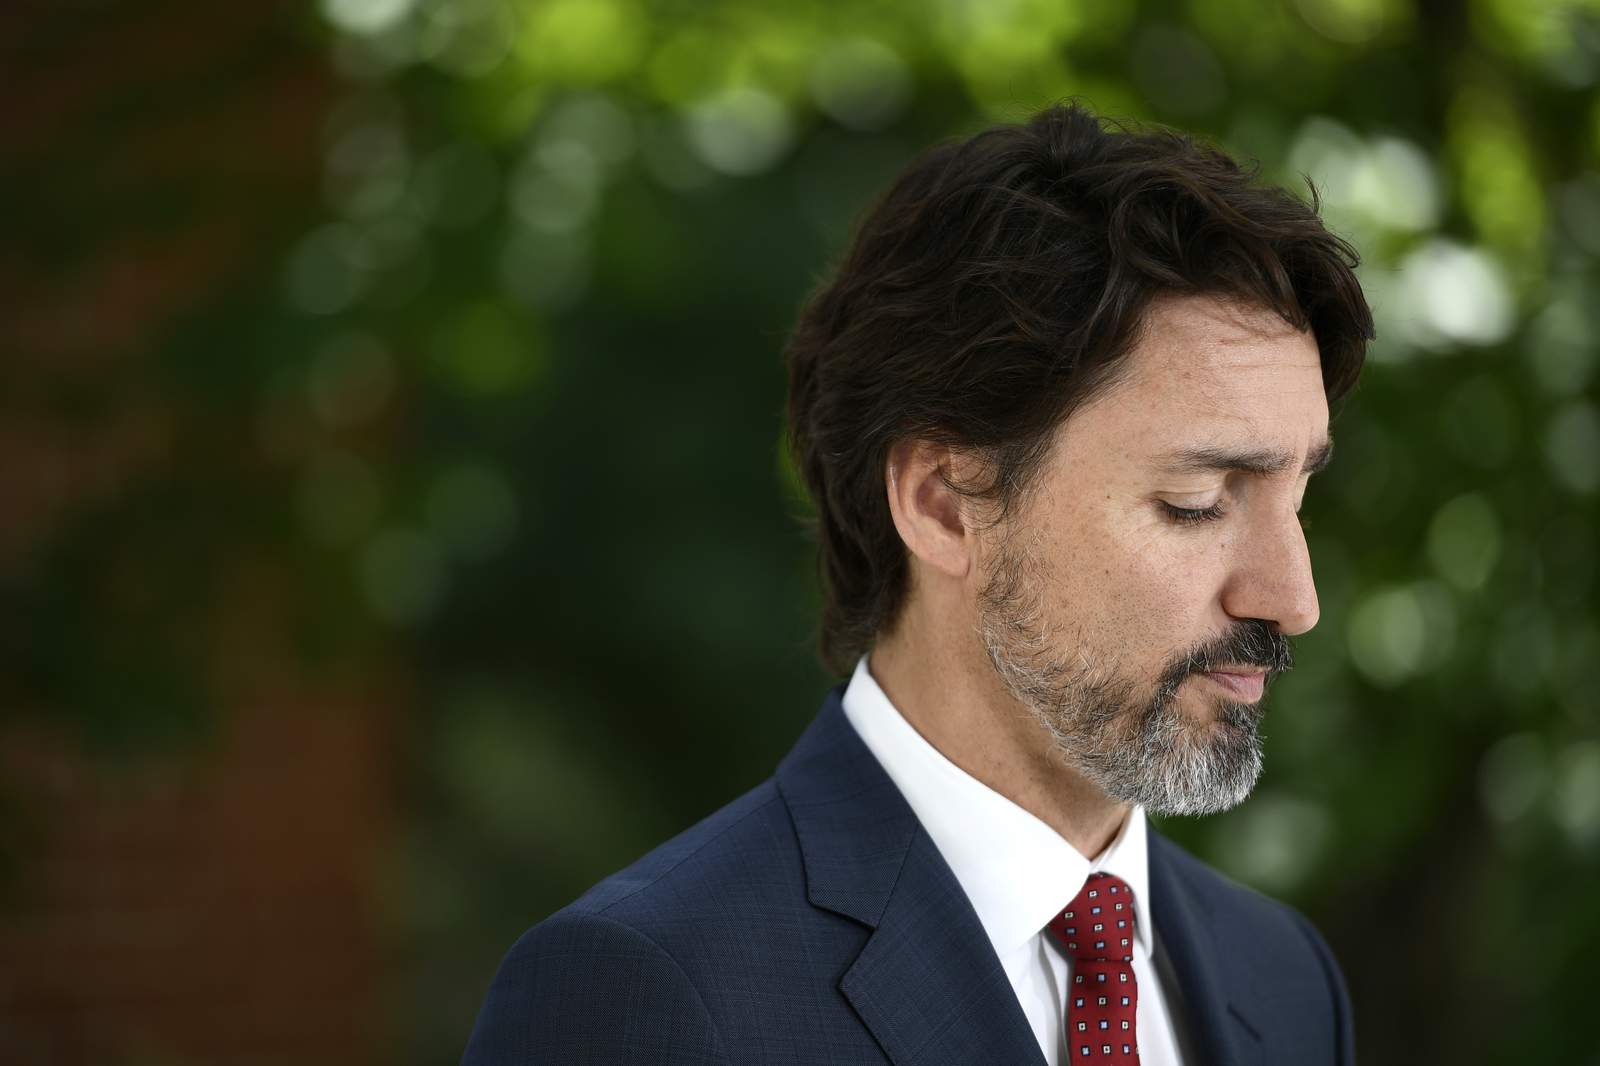 Canada's loss of UN Security Council seat a blow to Trudeau